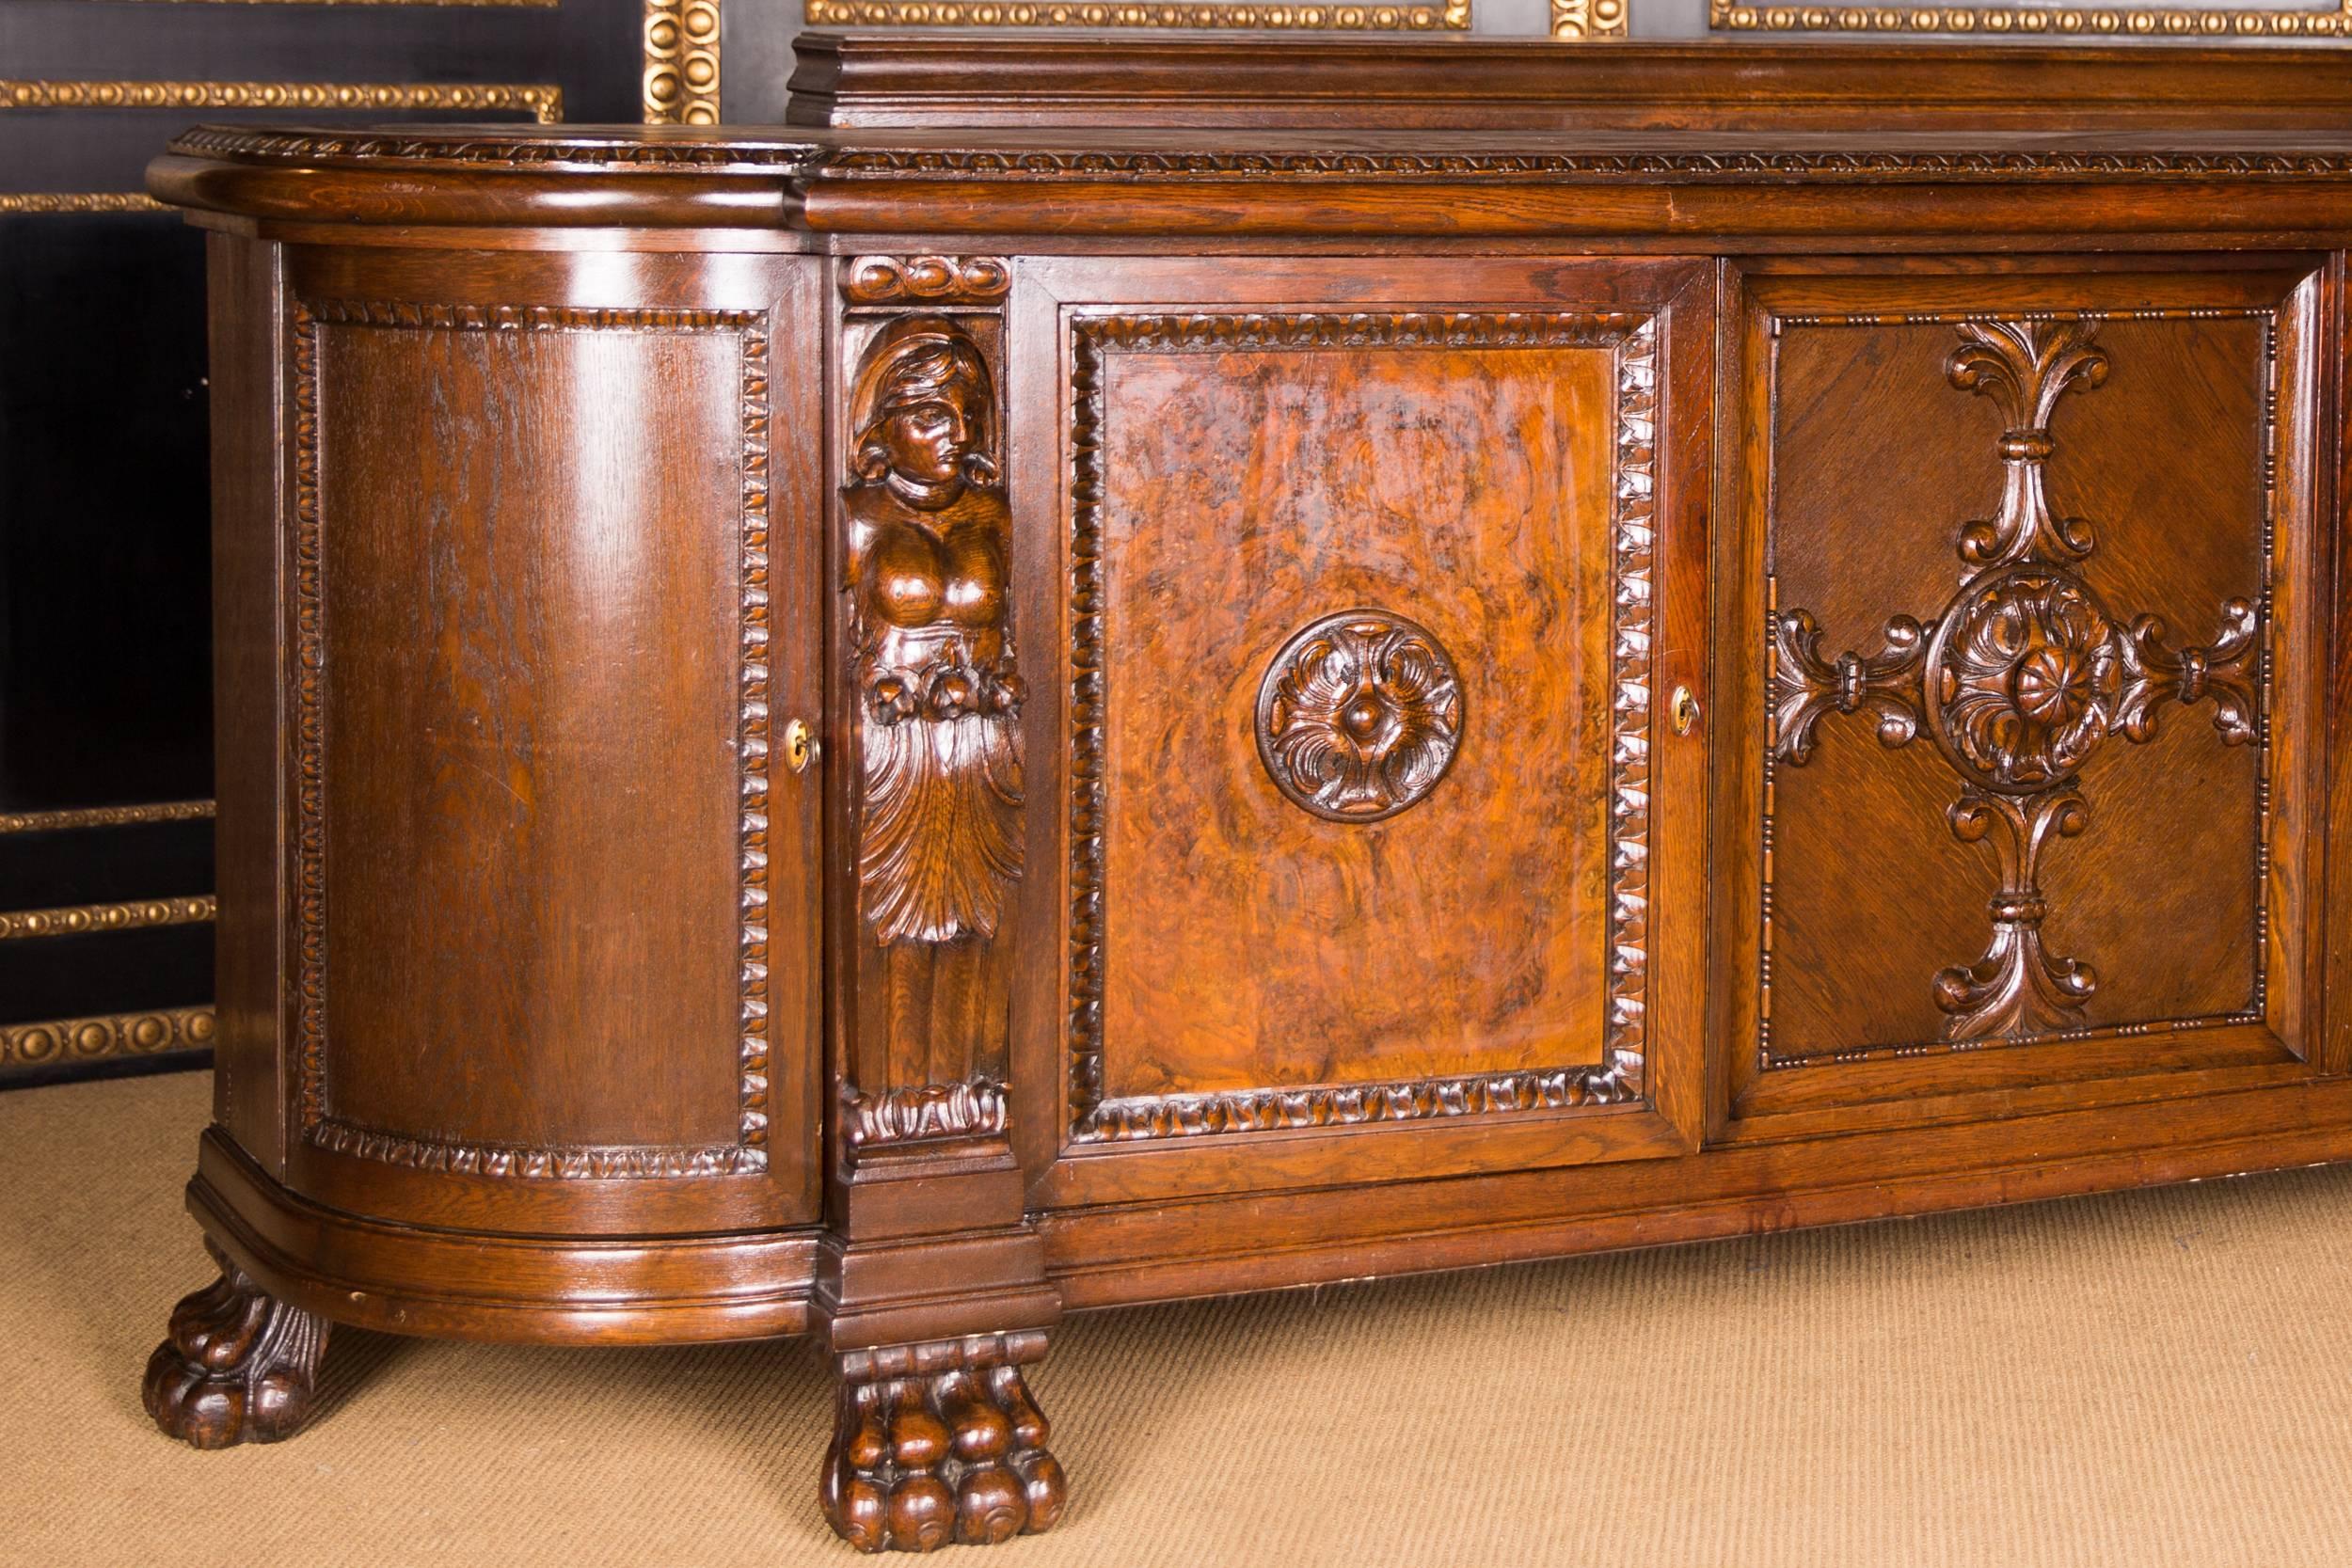 Solid oak with walnut grain. Profile framed base on pawprints. Rectangular, architecturally articulated body. Five carved doors, flanked by carved figures. Highly profiled cornice with top.